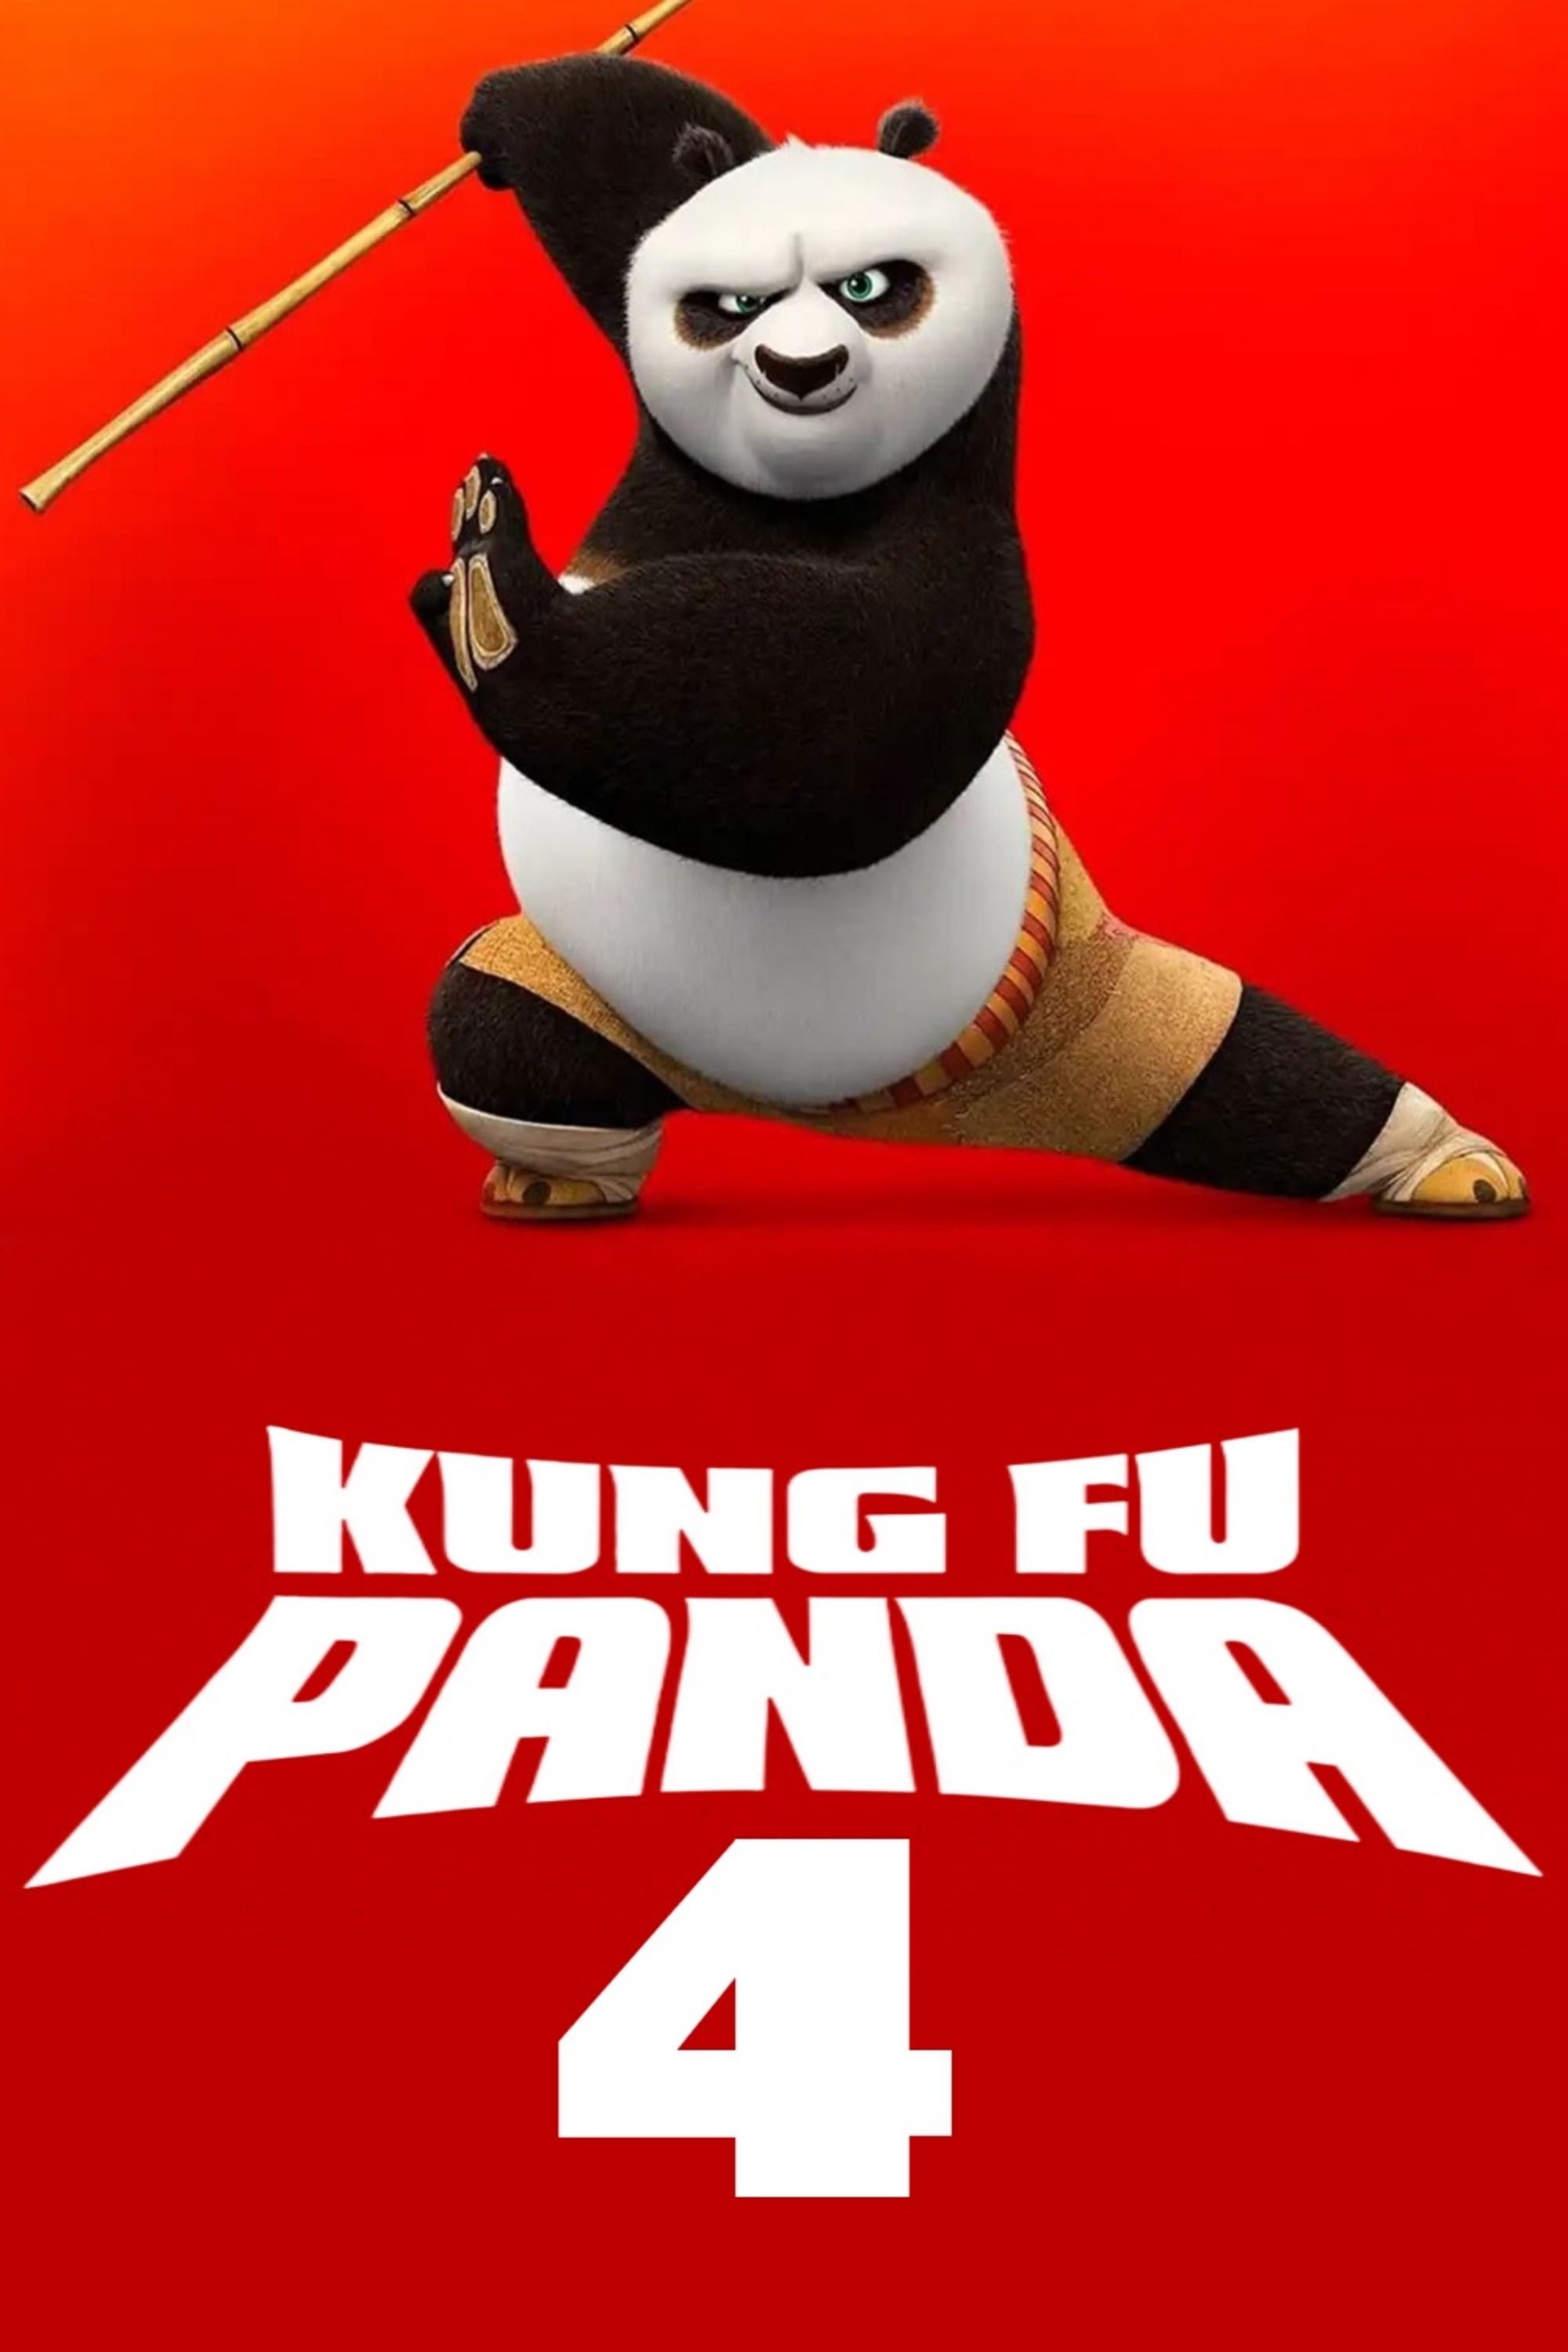 Kung Fu Panda 4' Poster — Po Is Ready for Action